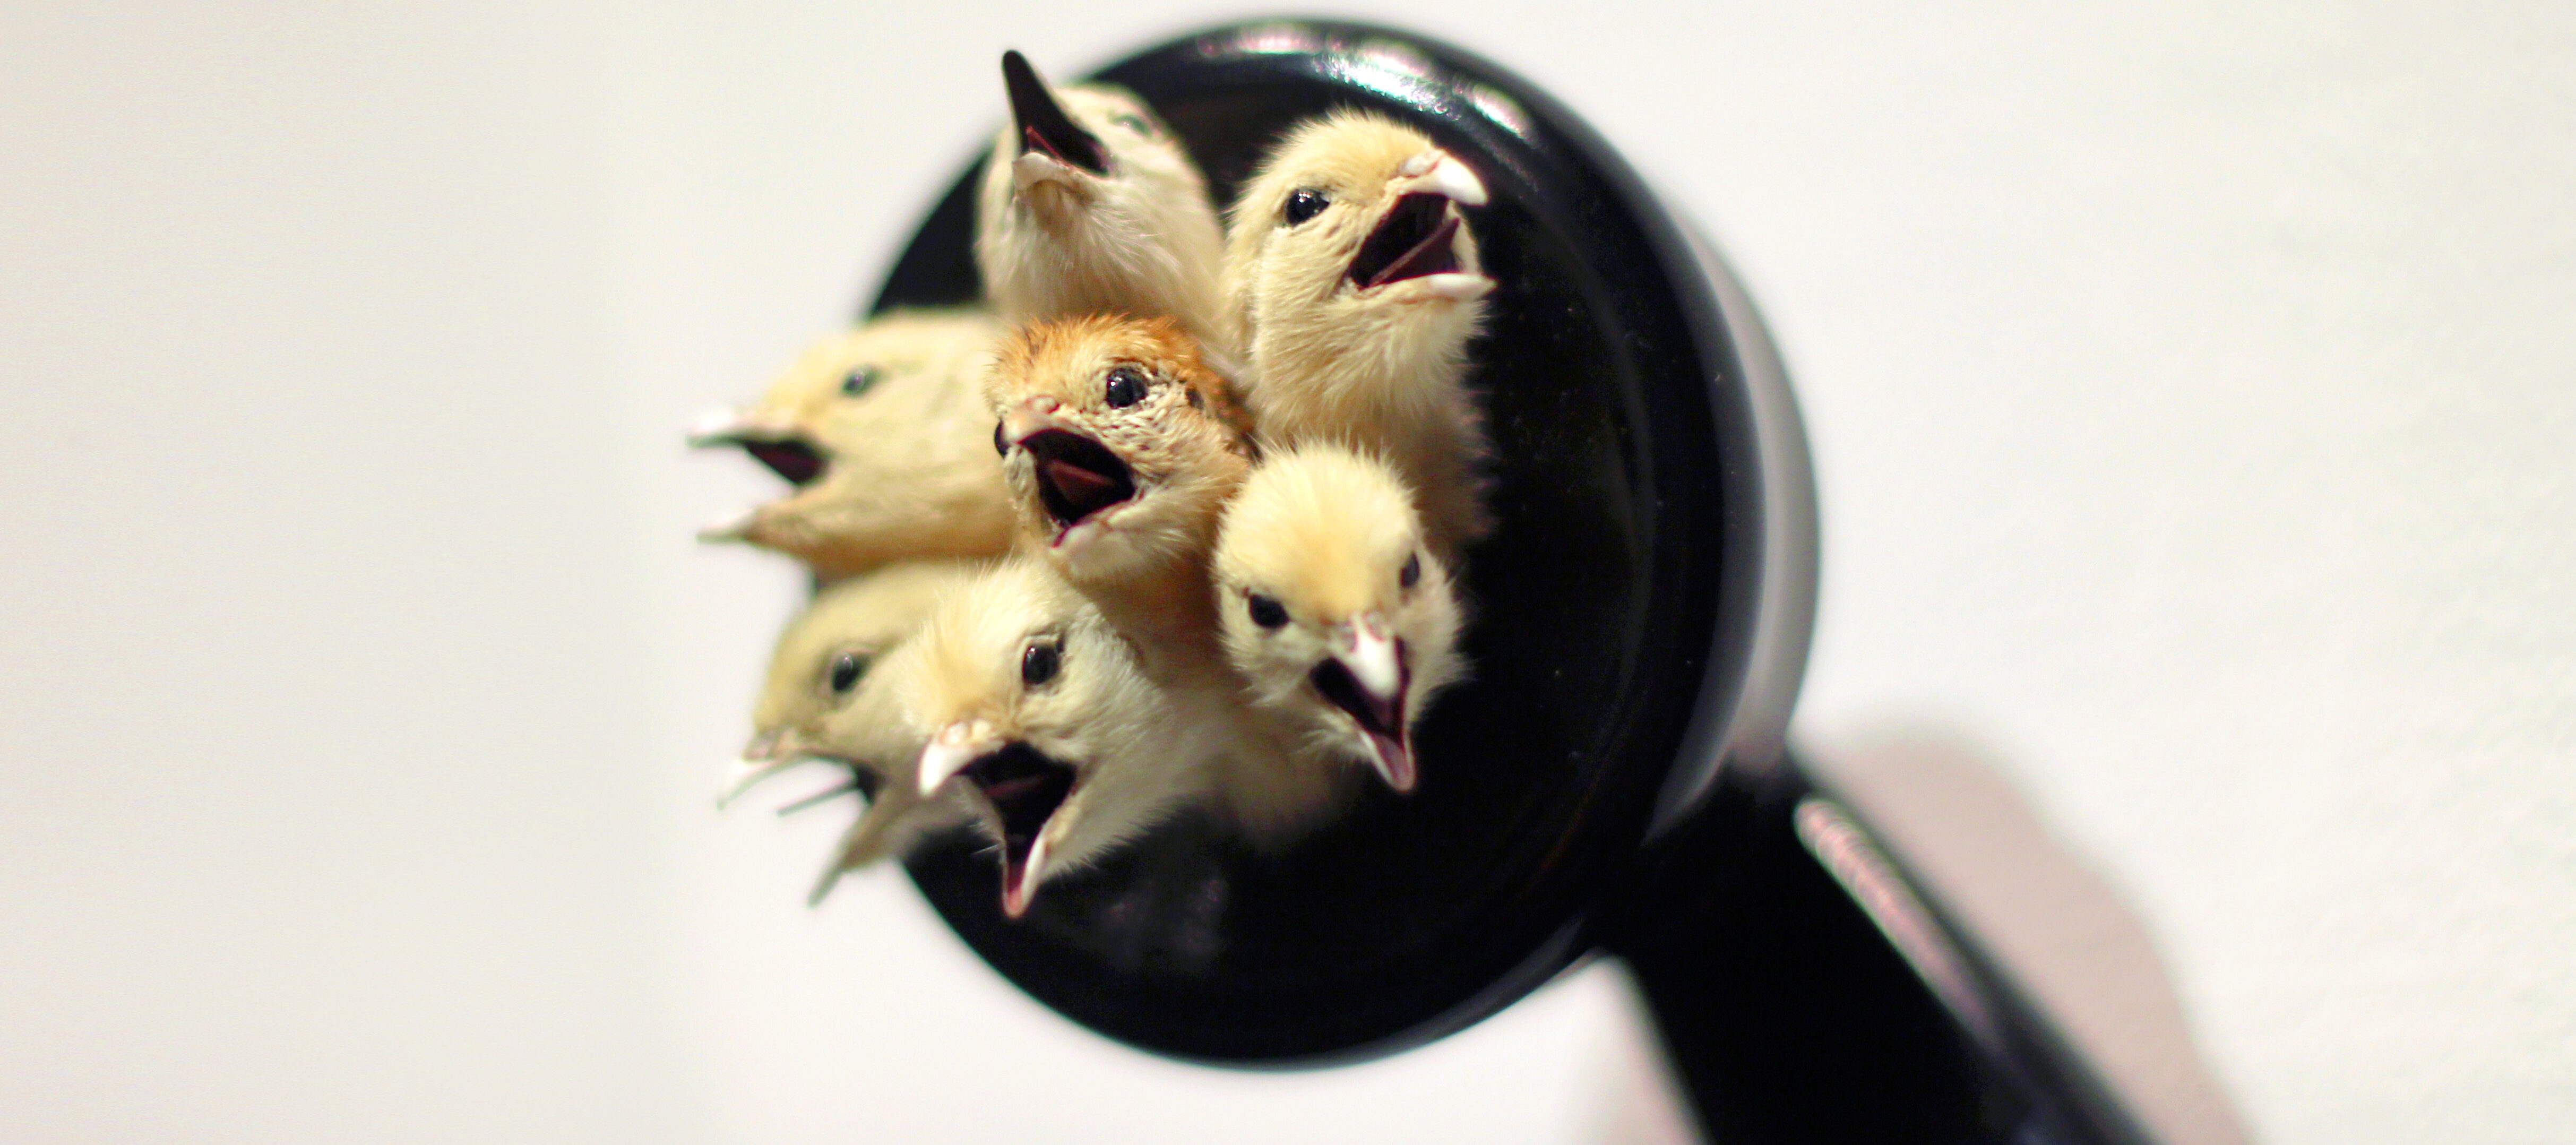 Old-fashioned black Bakelite telephone receiver with seven taxidermied chick heads with open beaks protruding from the earpiece.